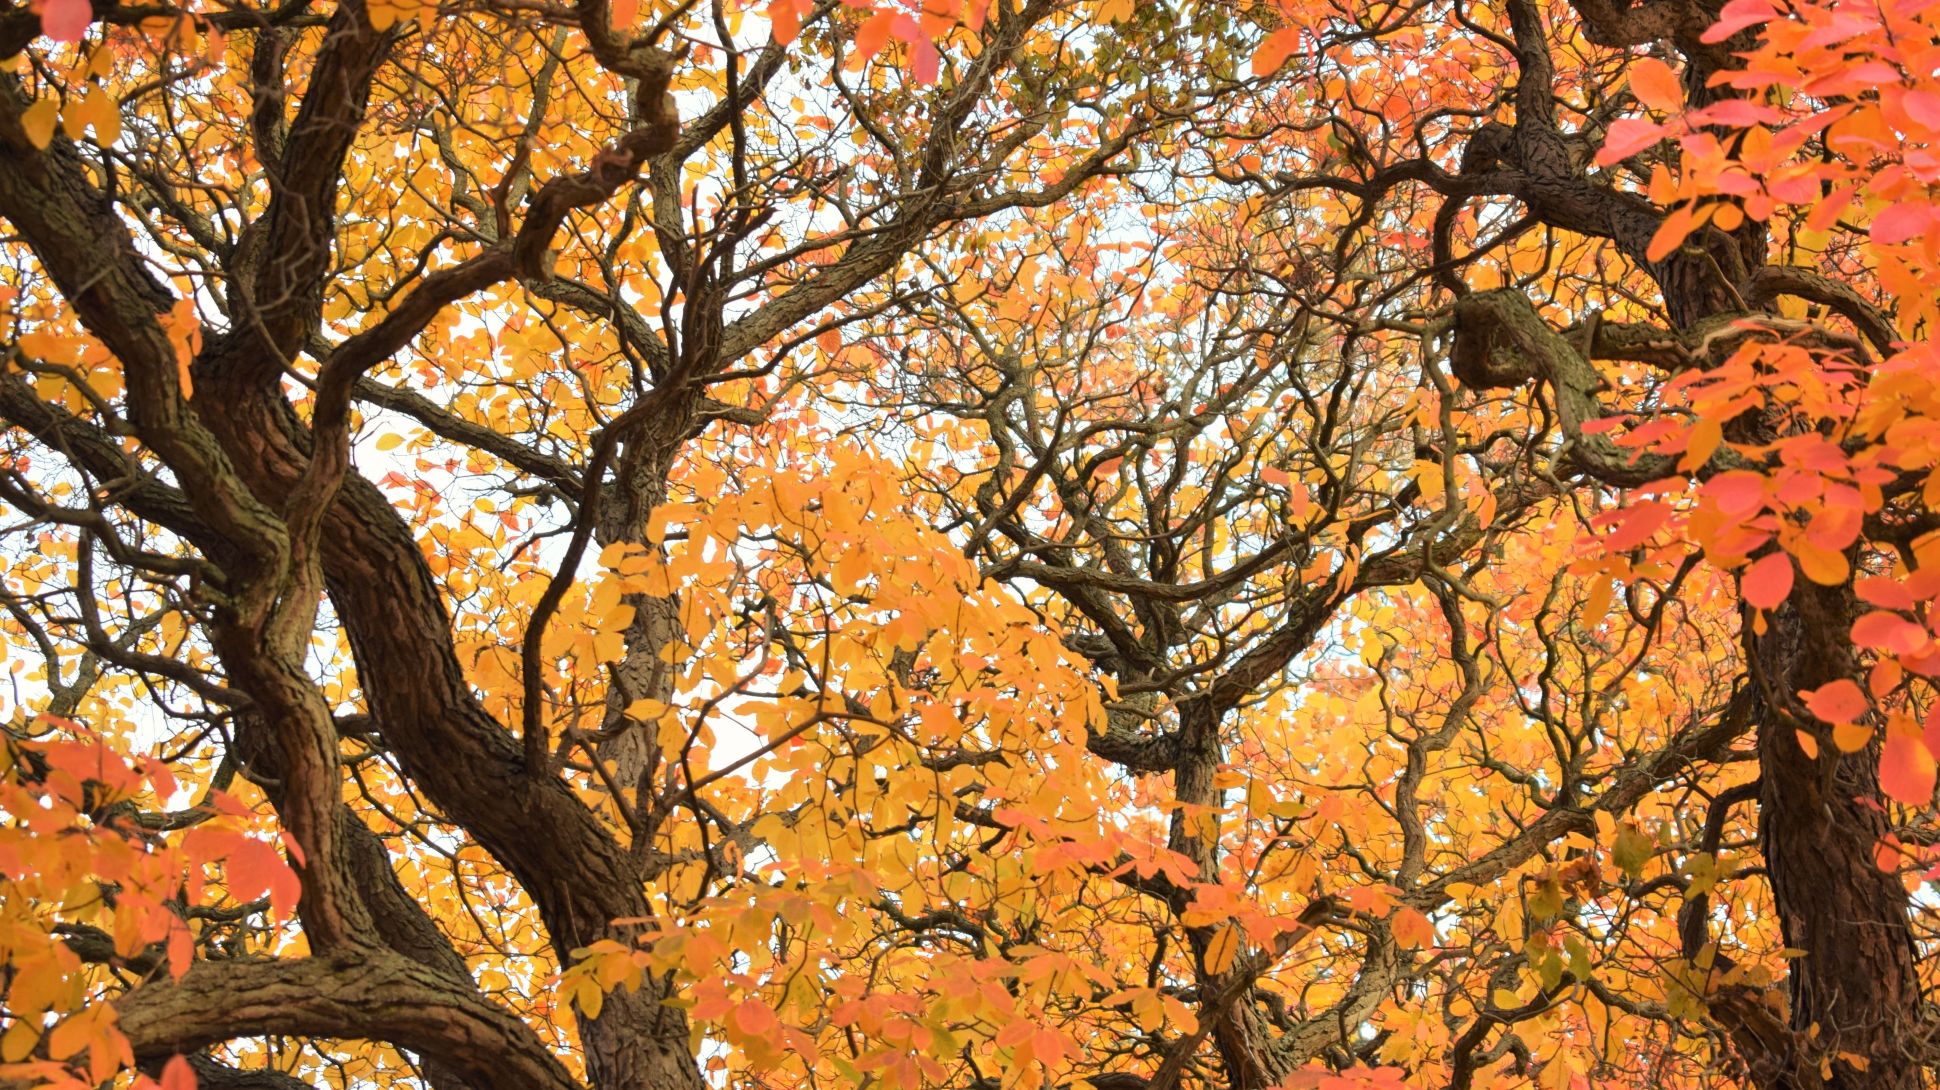 Autumn canopy of colourful leaves 